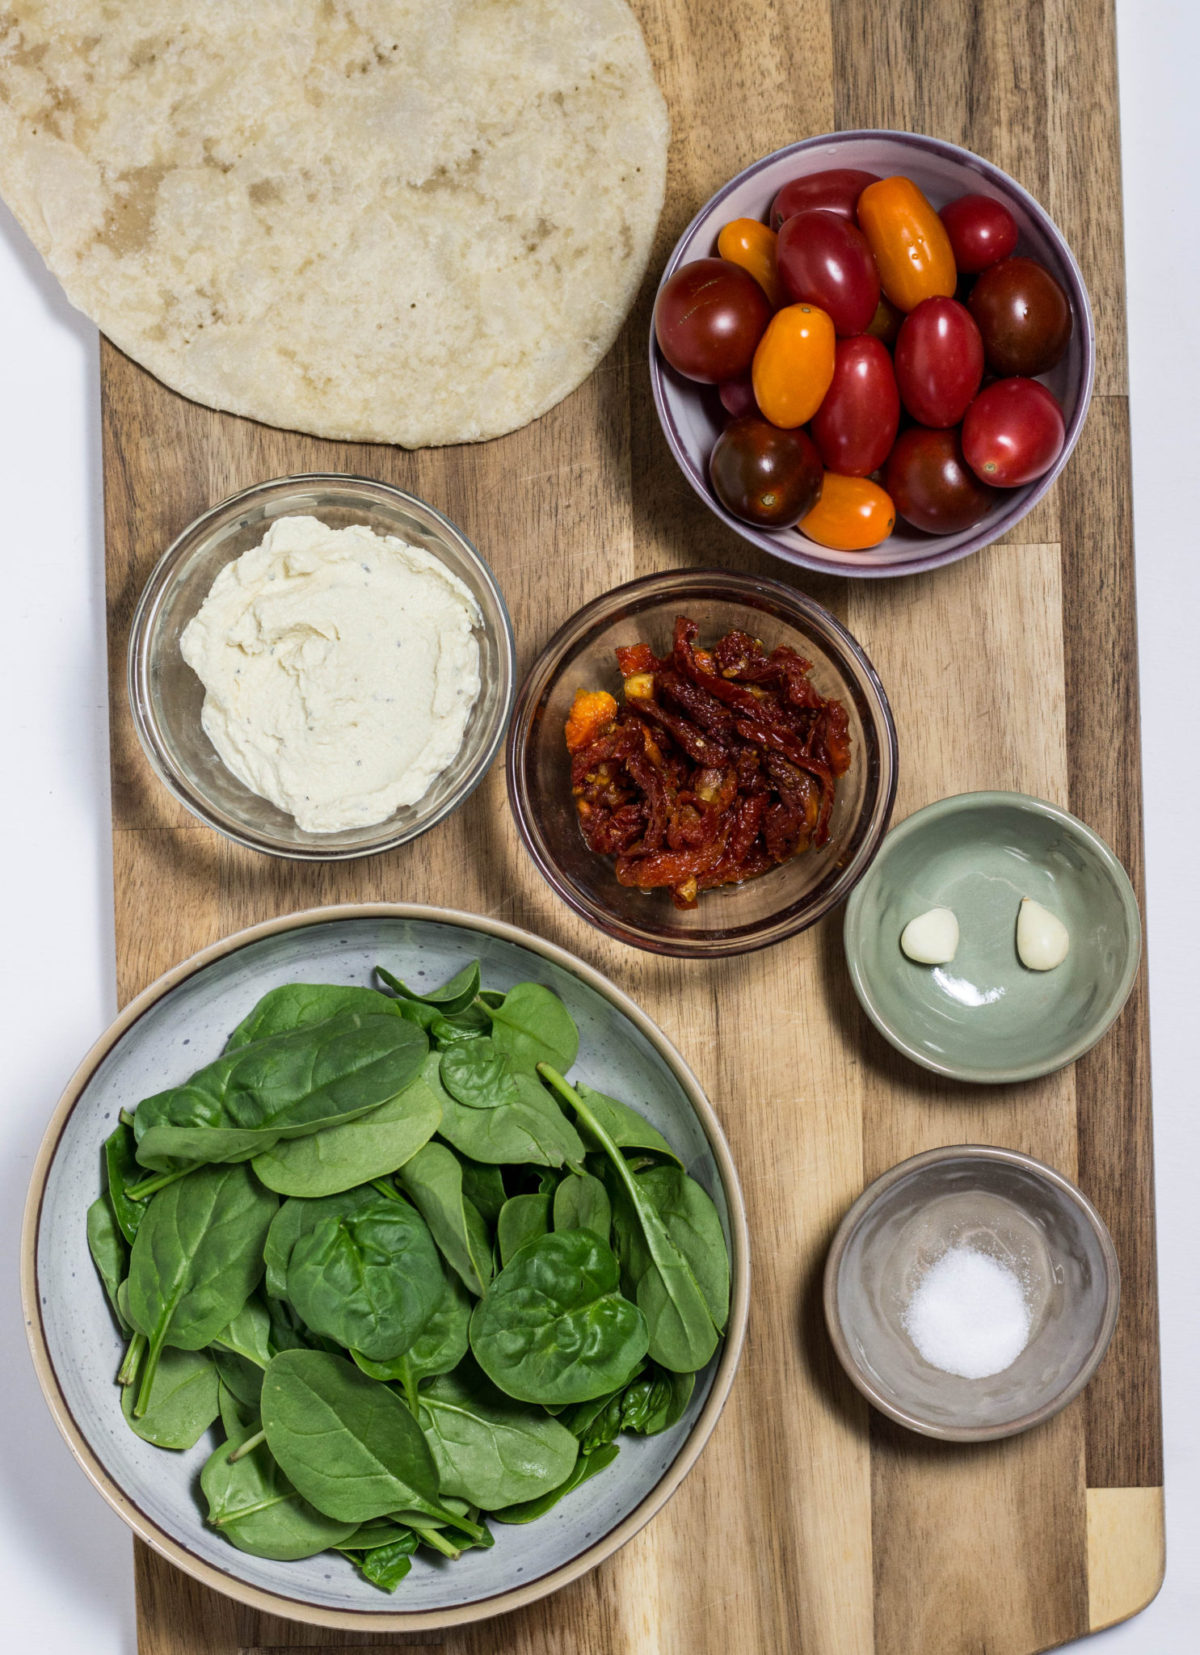 Ingredients for Vegan Tomato Flatbread on a wooden cutting board.